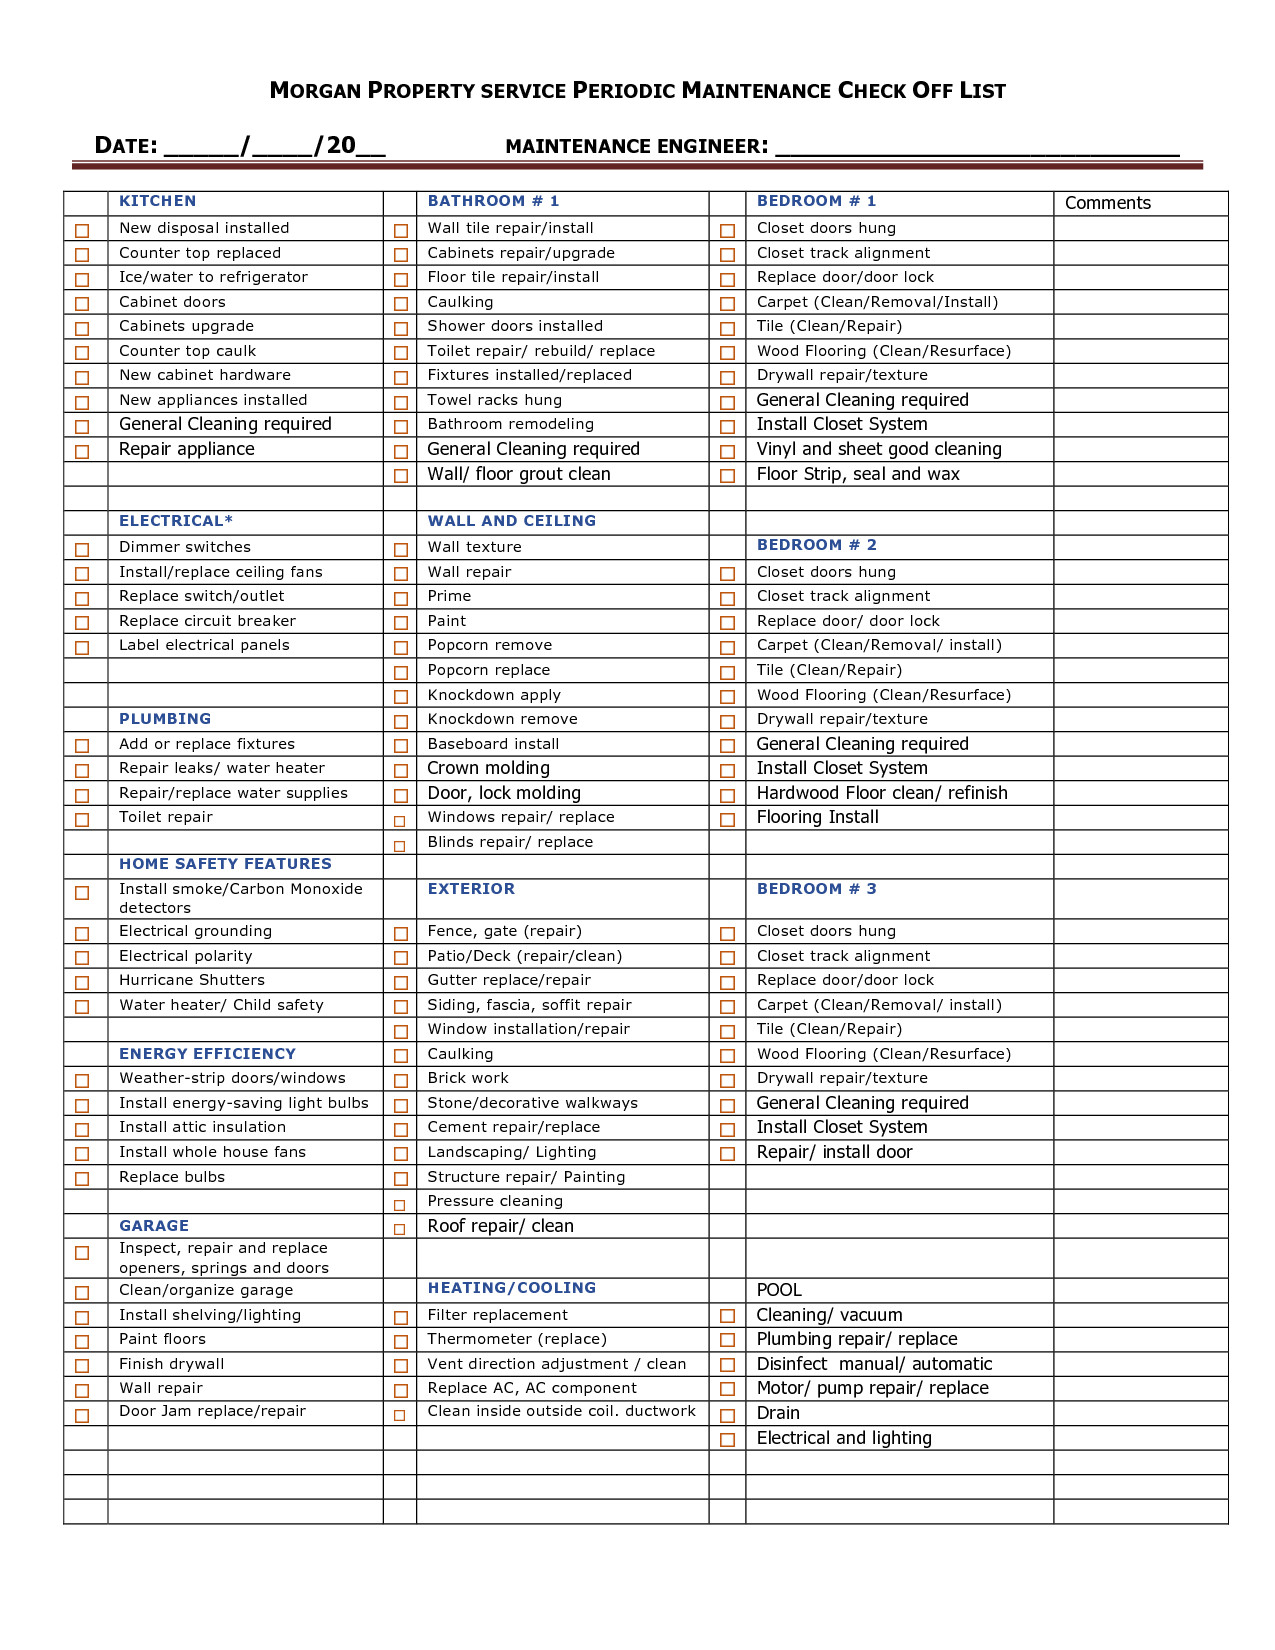 Home Inspection Checklist Template Printable Home Inspection Checklist